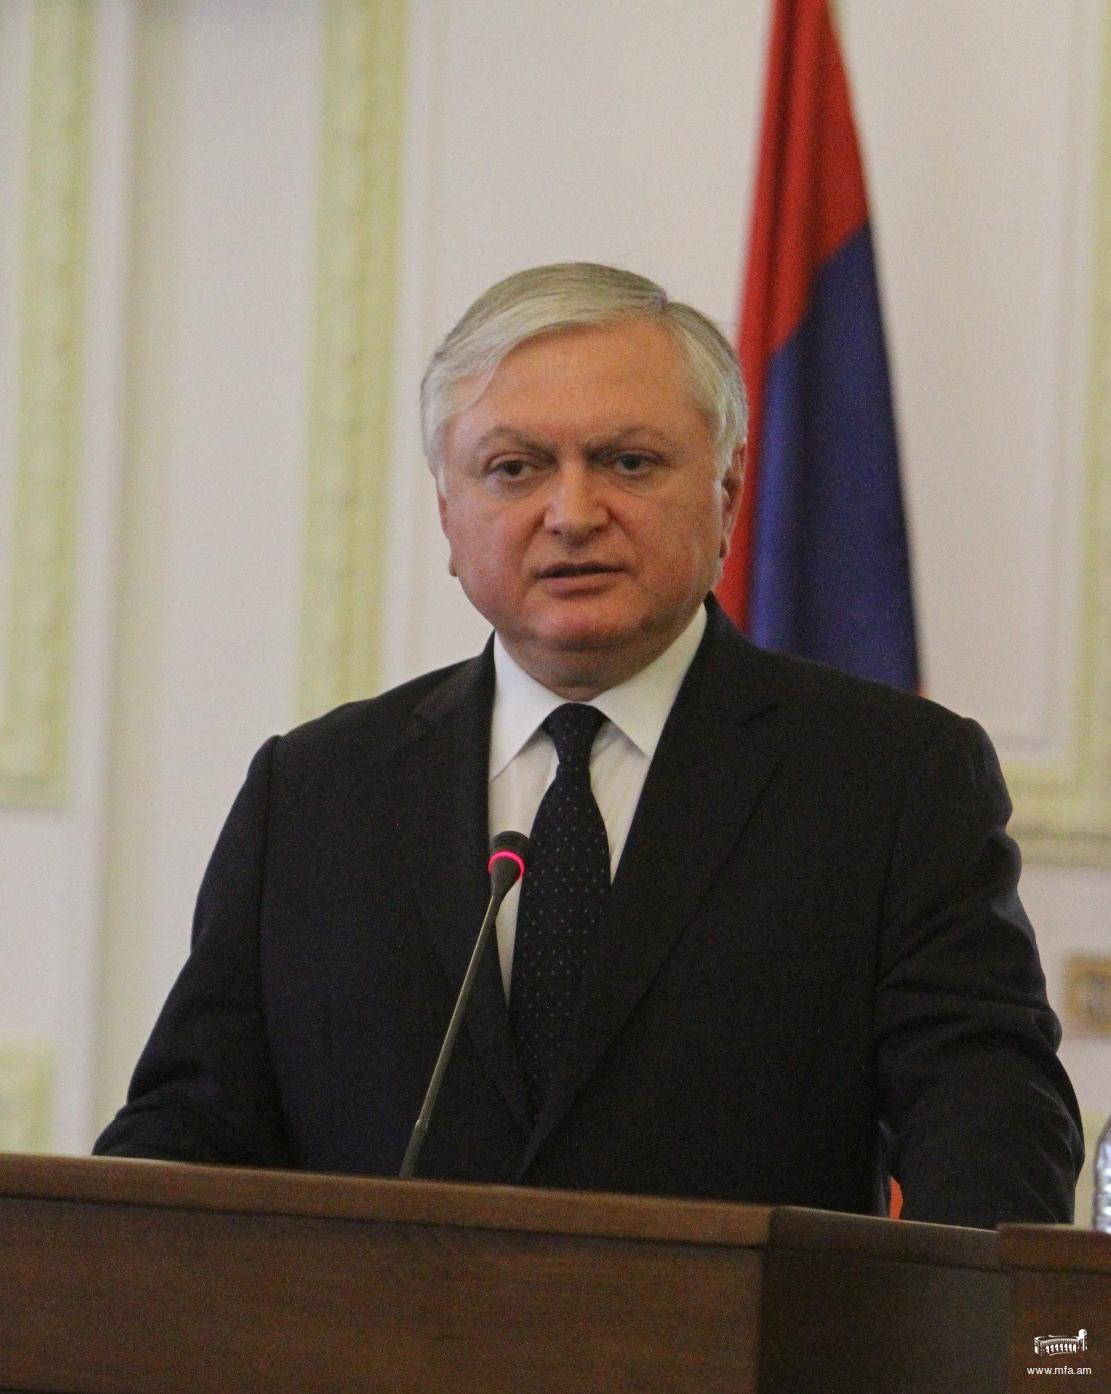 Statement by the Armenian Foreign Minister Edward Nalbandian on agreement reached over the Iranian nuclear program